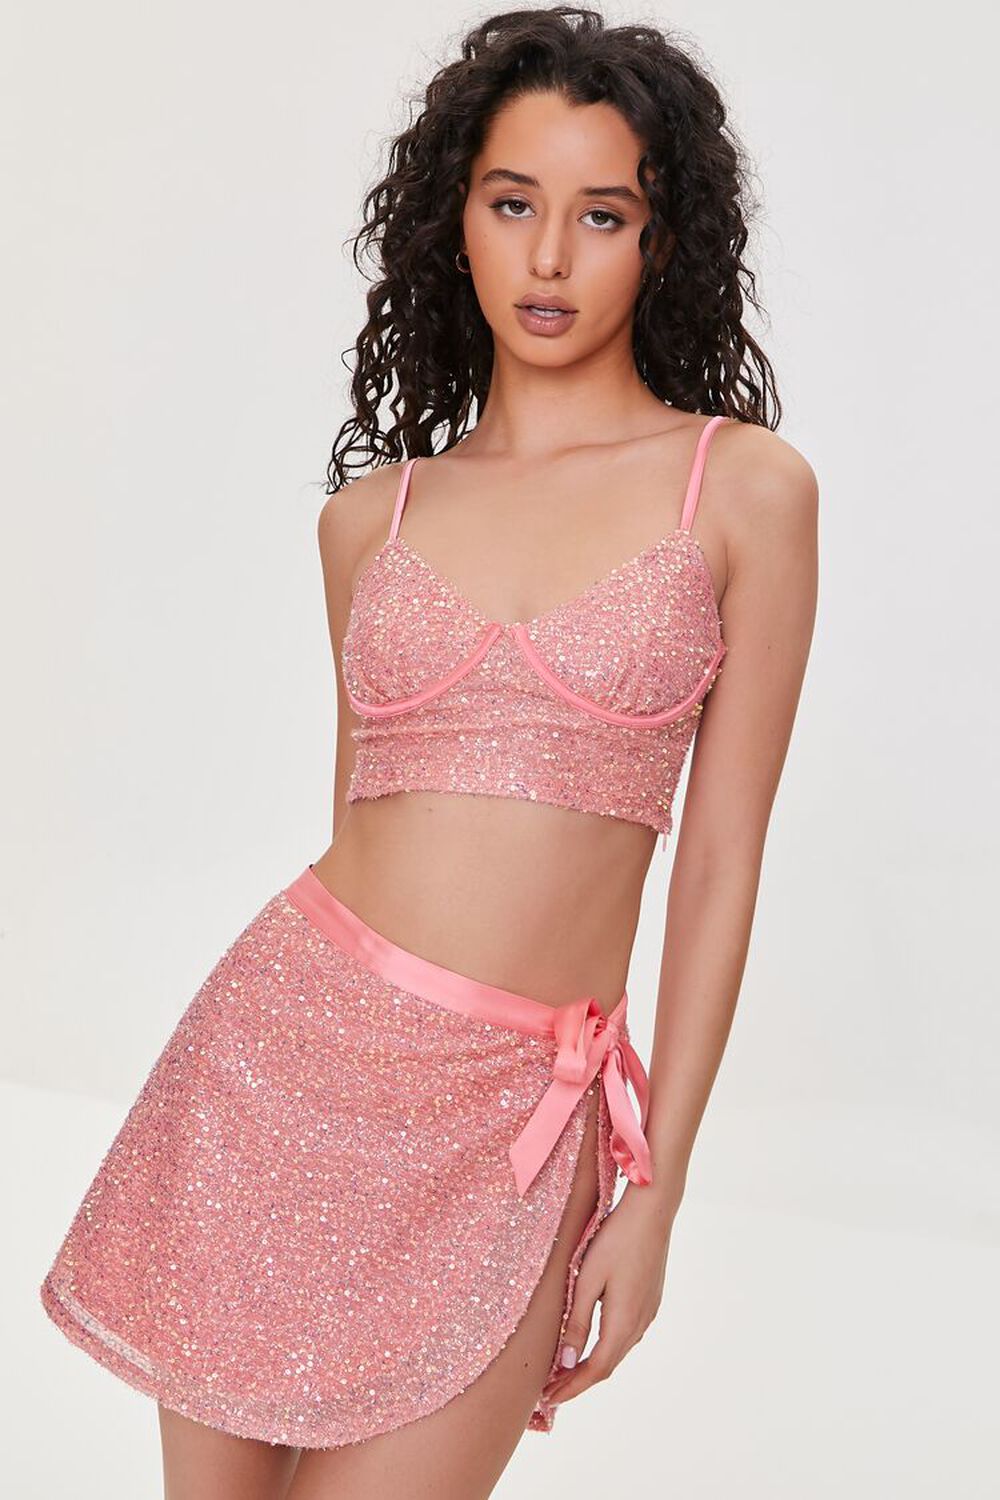 PINK ICING Sequin Mini Skirt, image 1